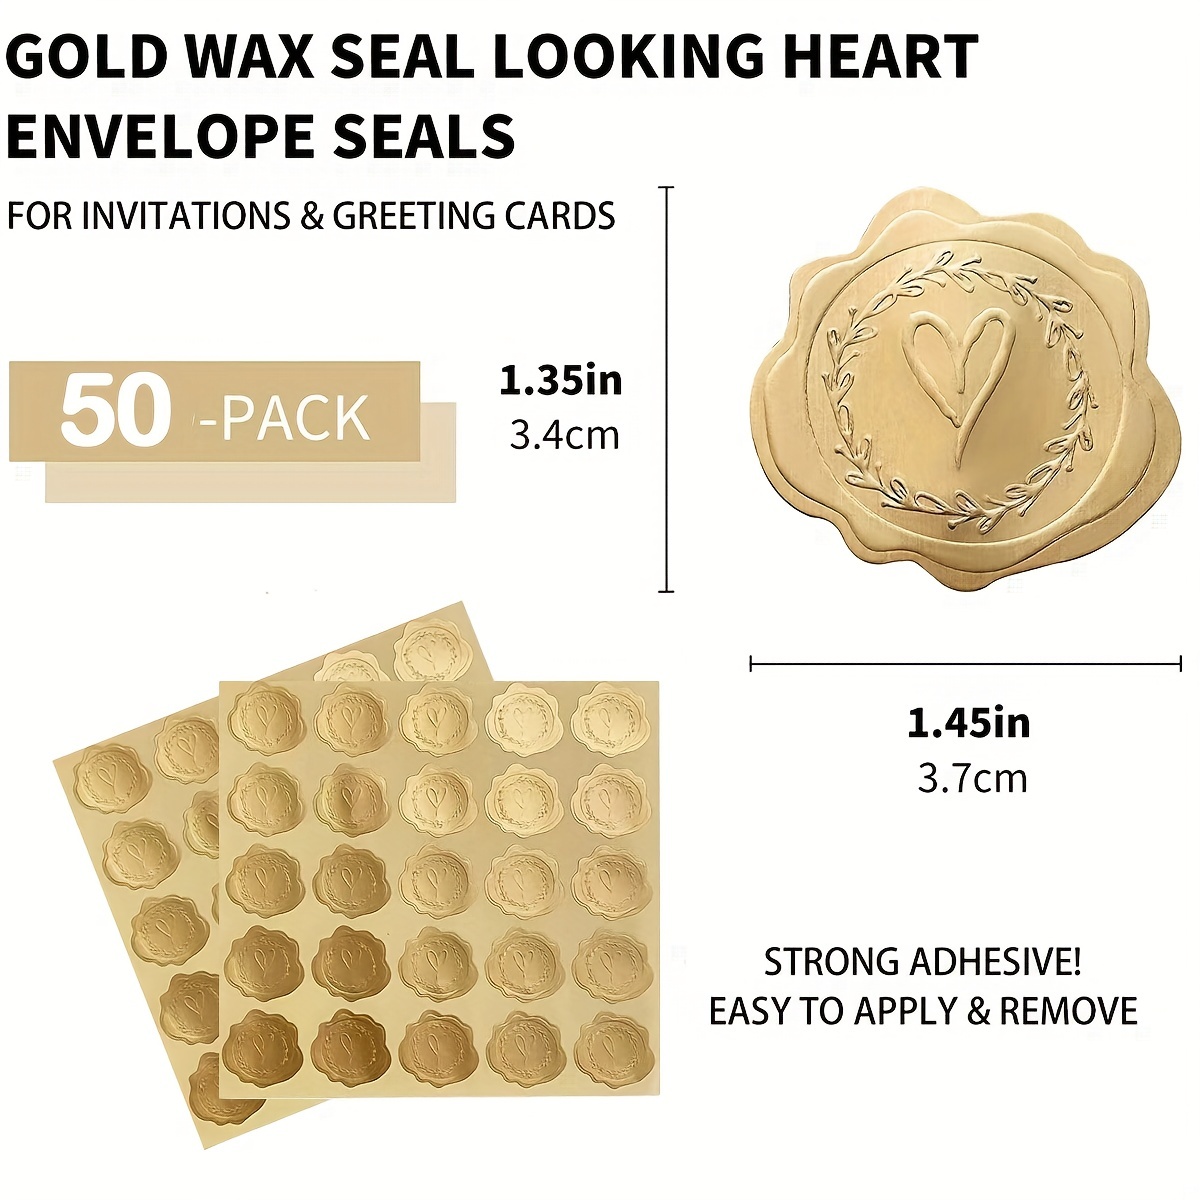 Pack Of 25, Gold Embossed Wax Seals Look Heart Envelope Seals, Wedding  Invitations/Greeting Cards/Party Favors, Self Adhesive, Summer Decorations,  Par